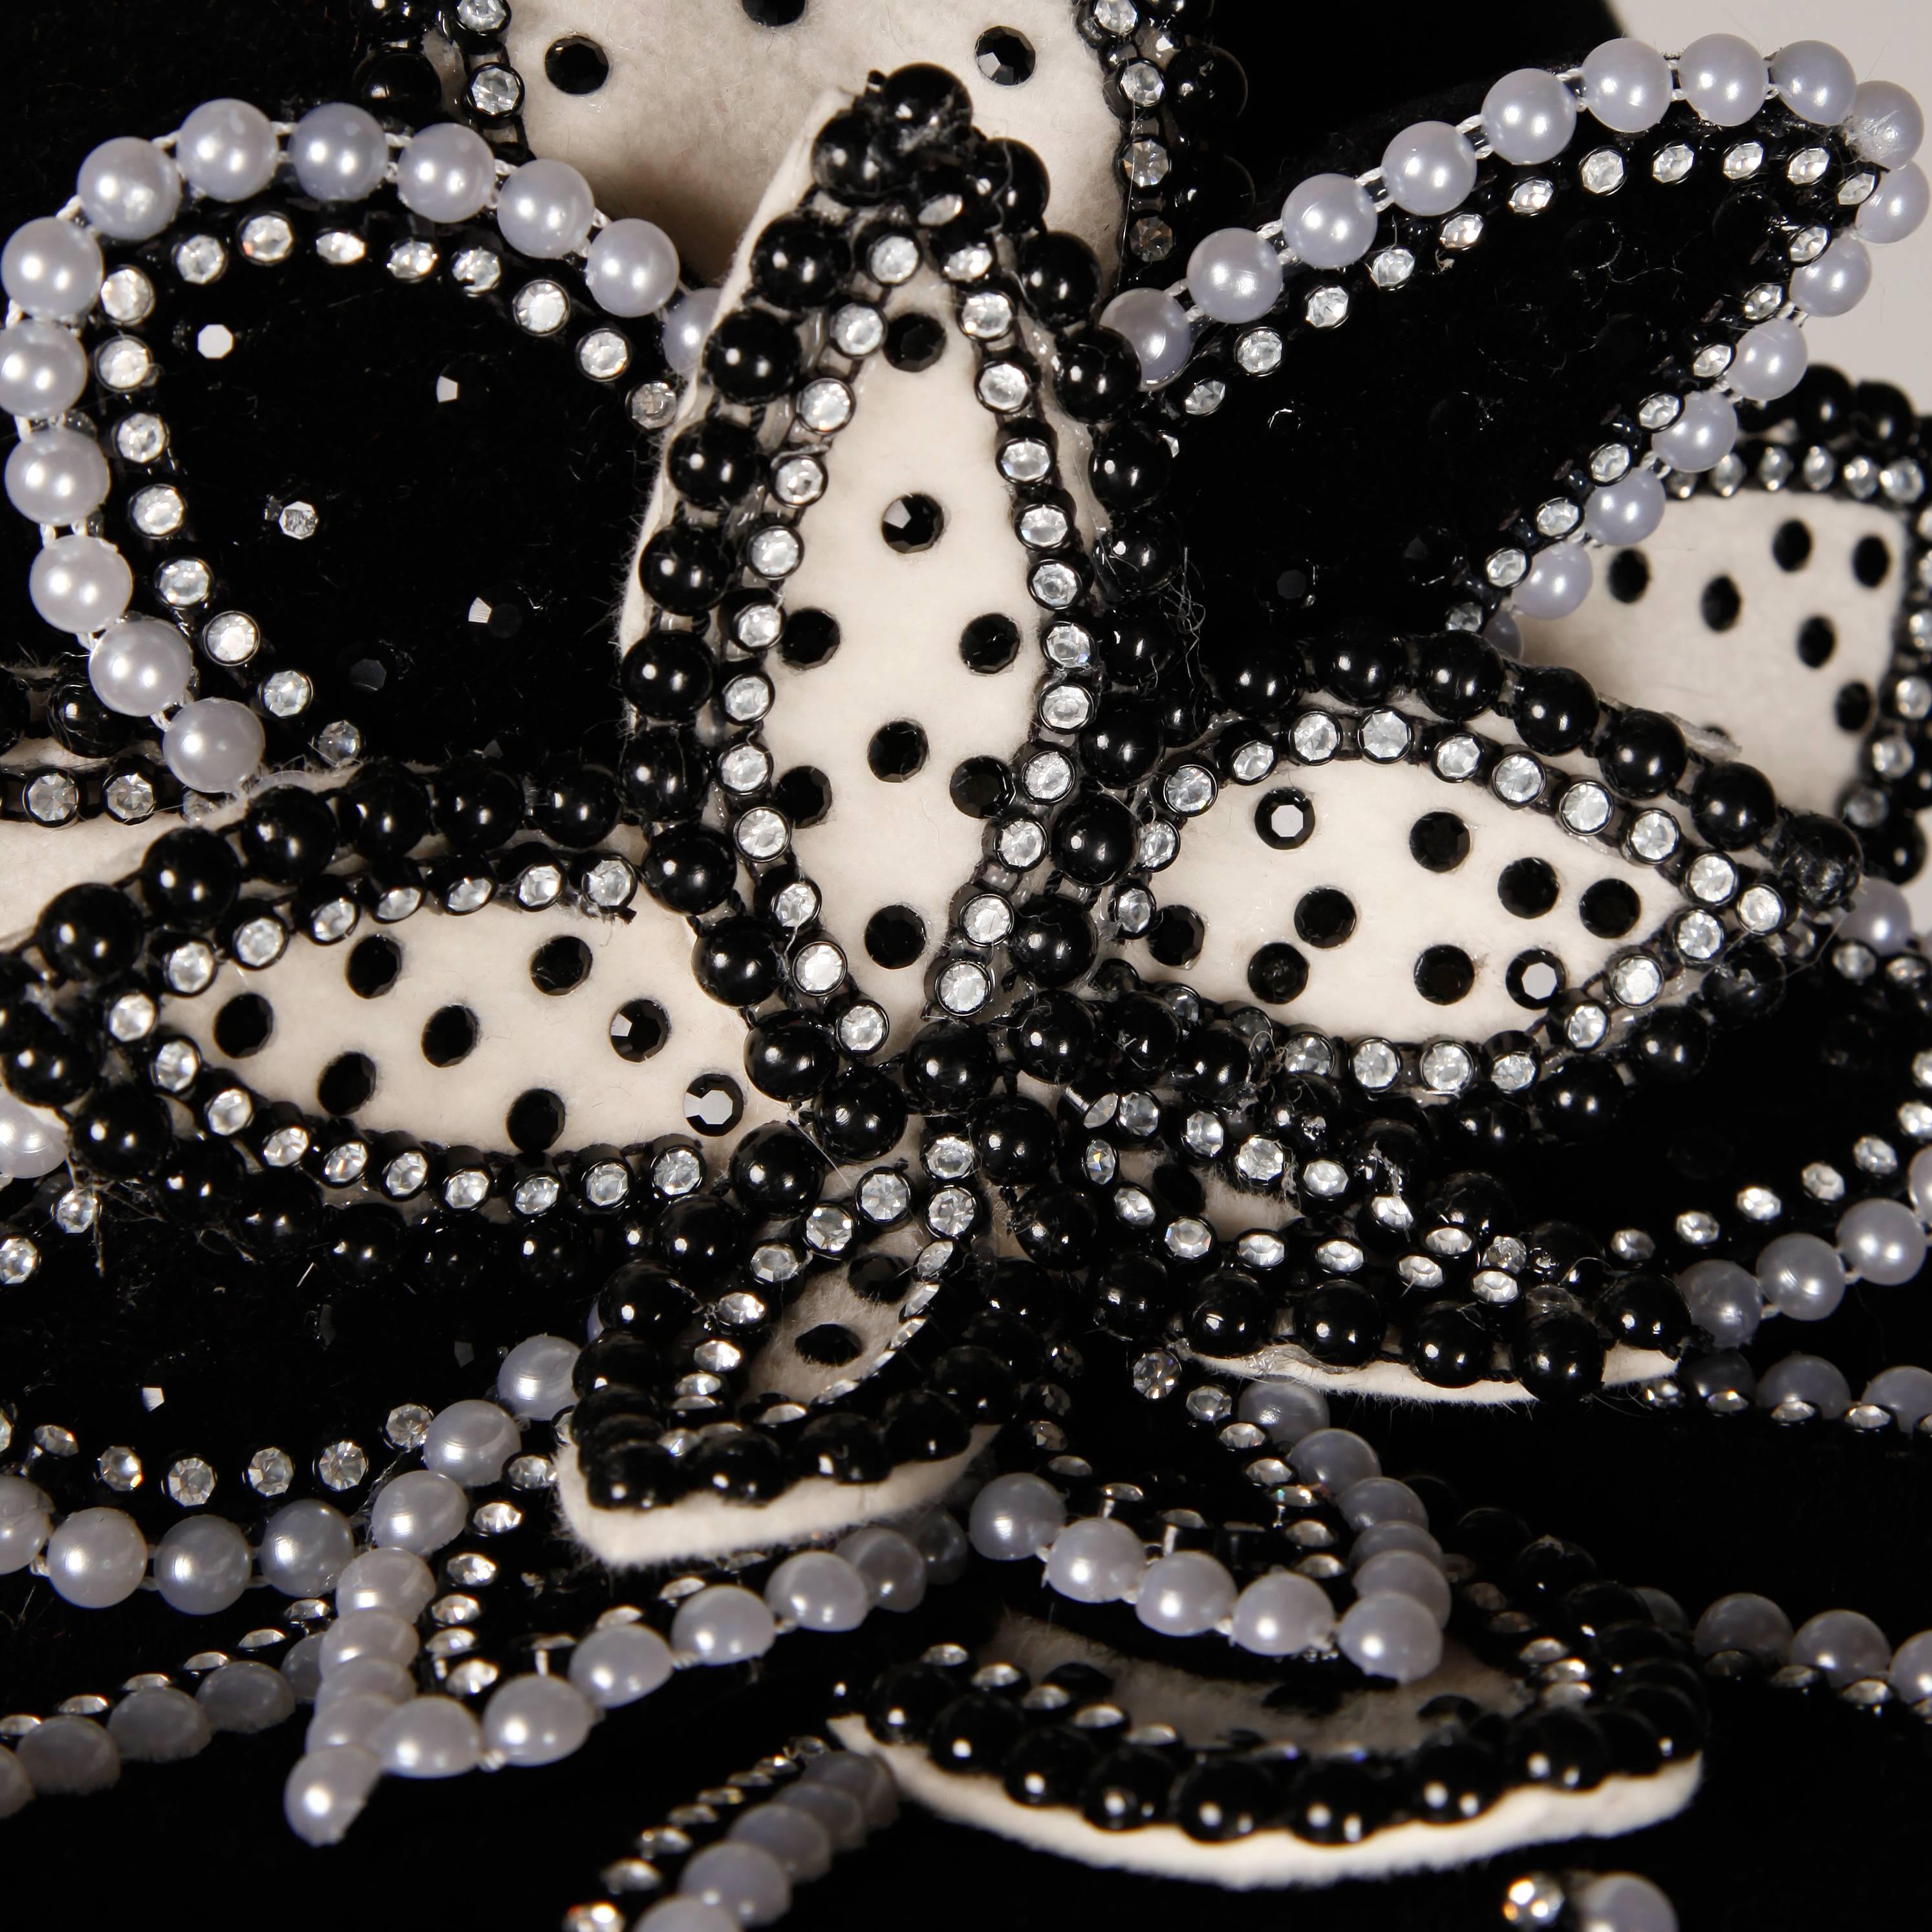 George Zamau'l Vintage Black + White Beaded Flower Embellished Rhinestone Hat In New Condition For Sale In Sparks, NV